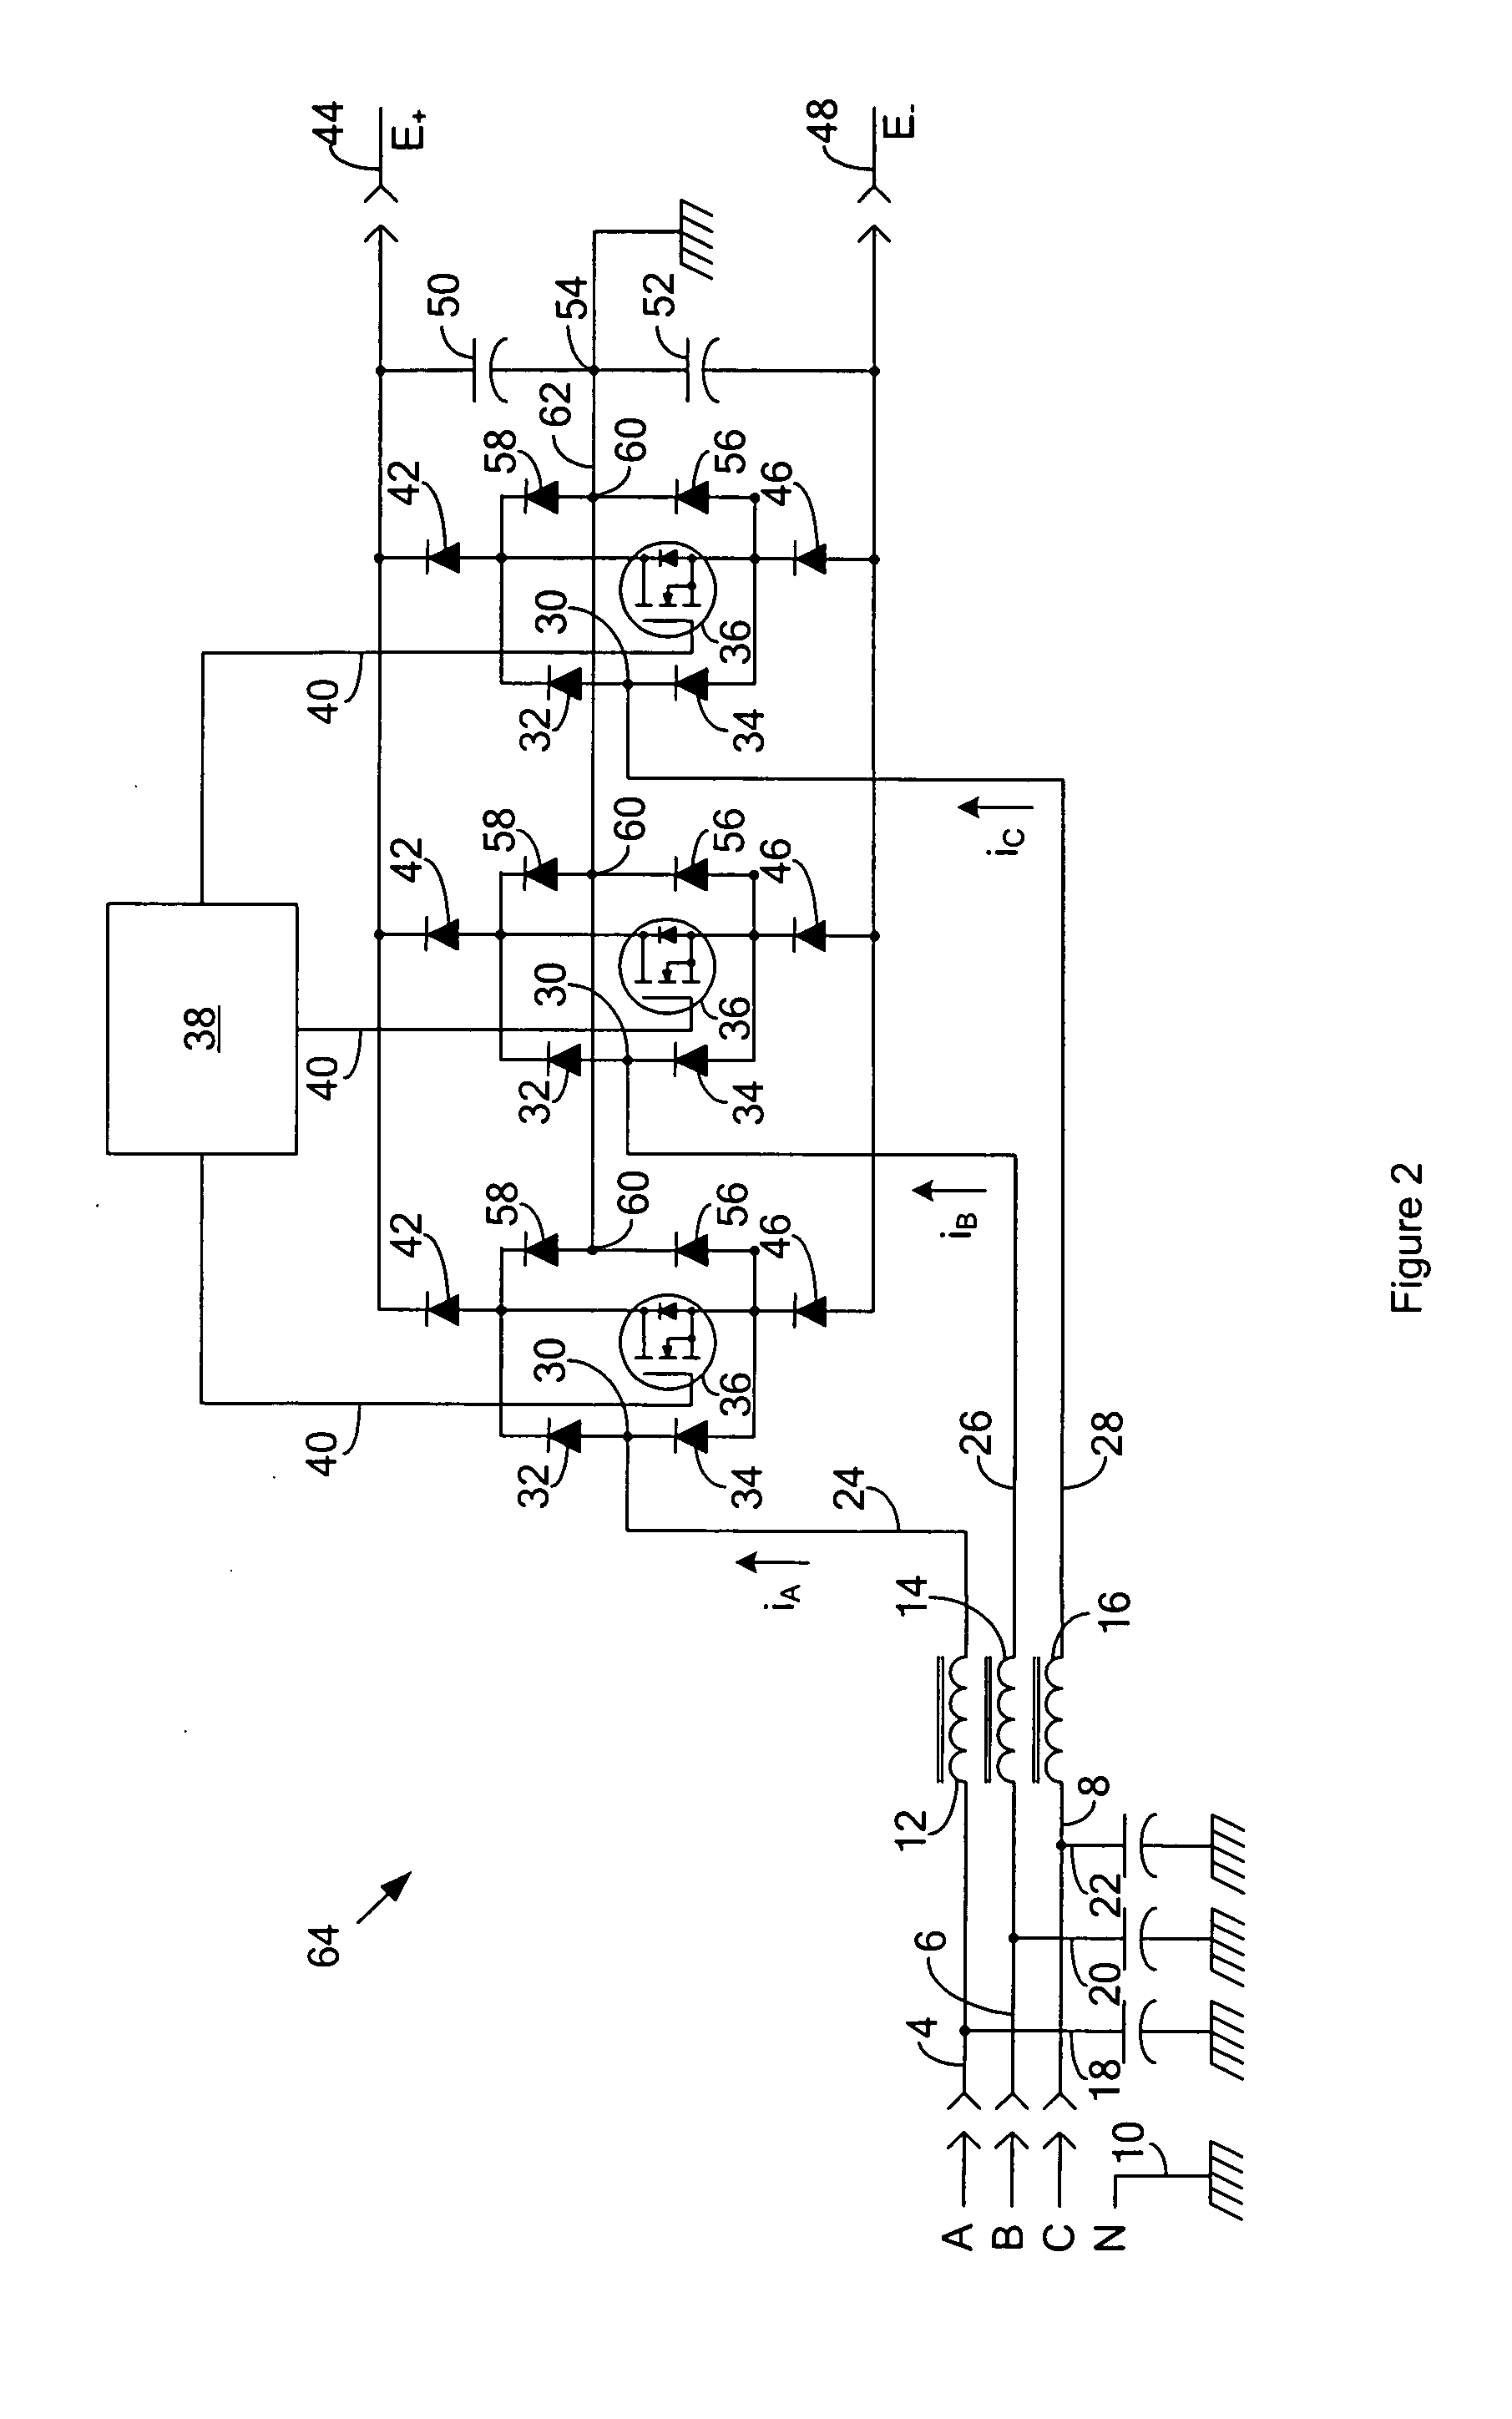 Active rectifier system with power factor correction